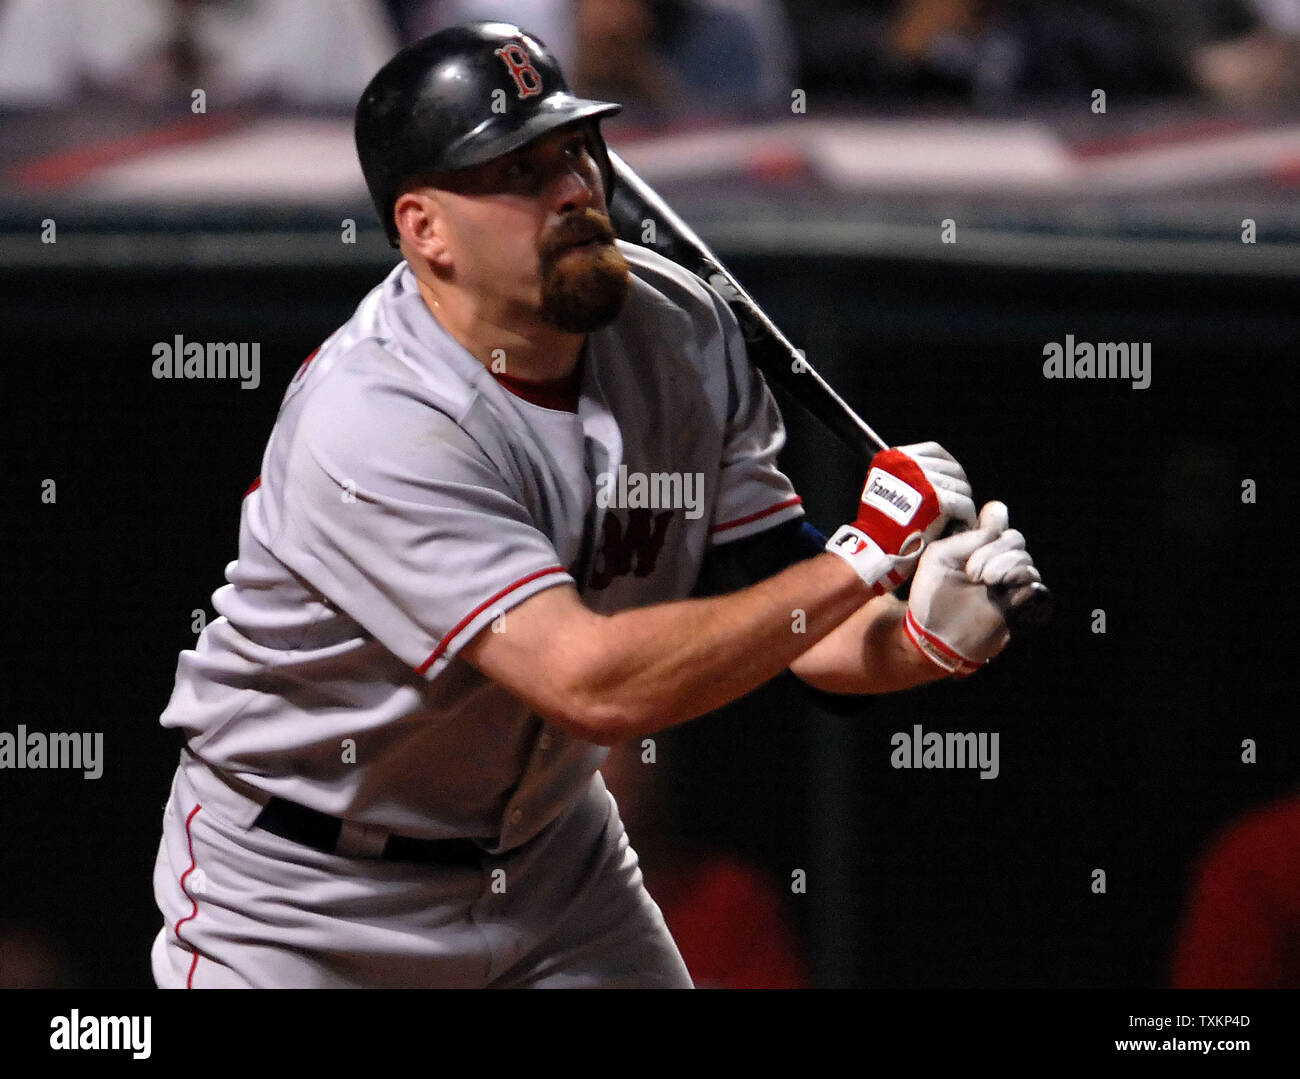 UC alum Kevin Youkilis wins second World Series with Boston Red Sox,  University of Cincinnati